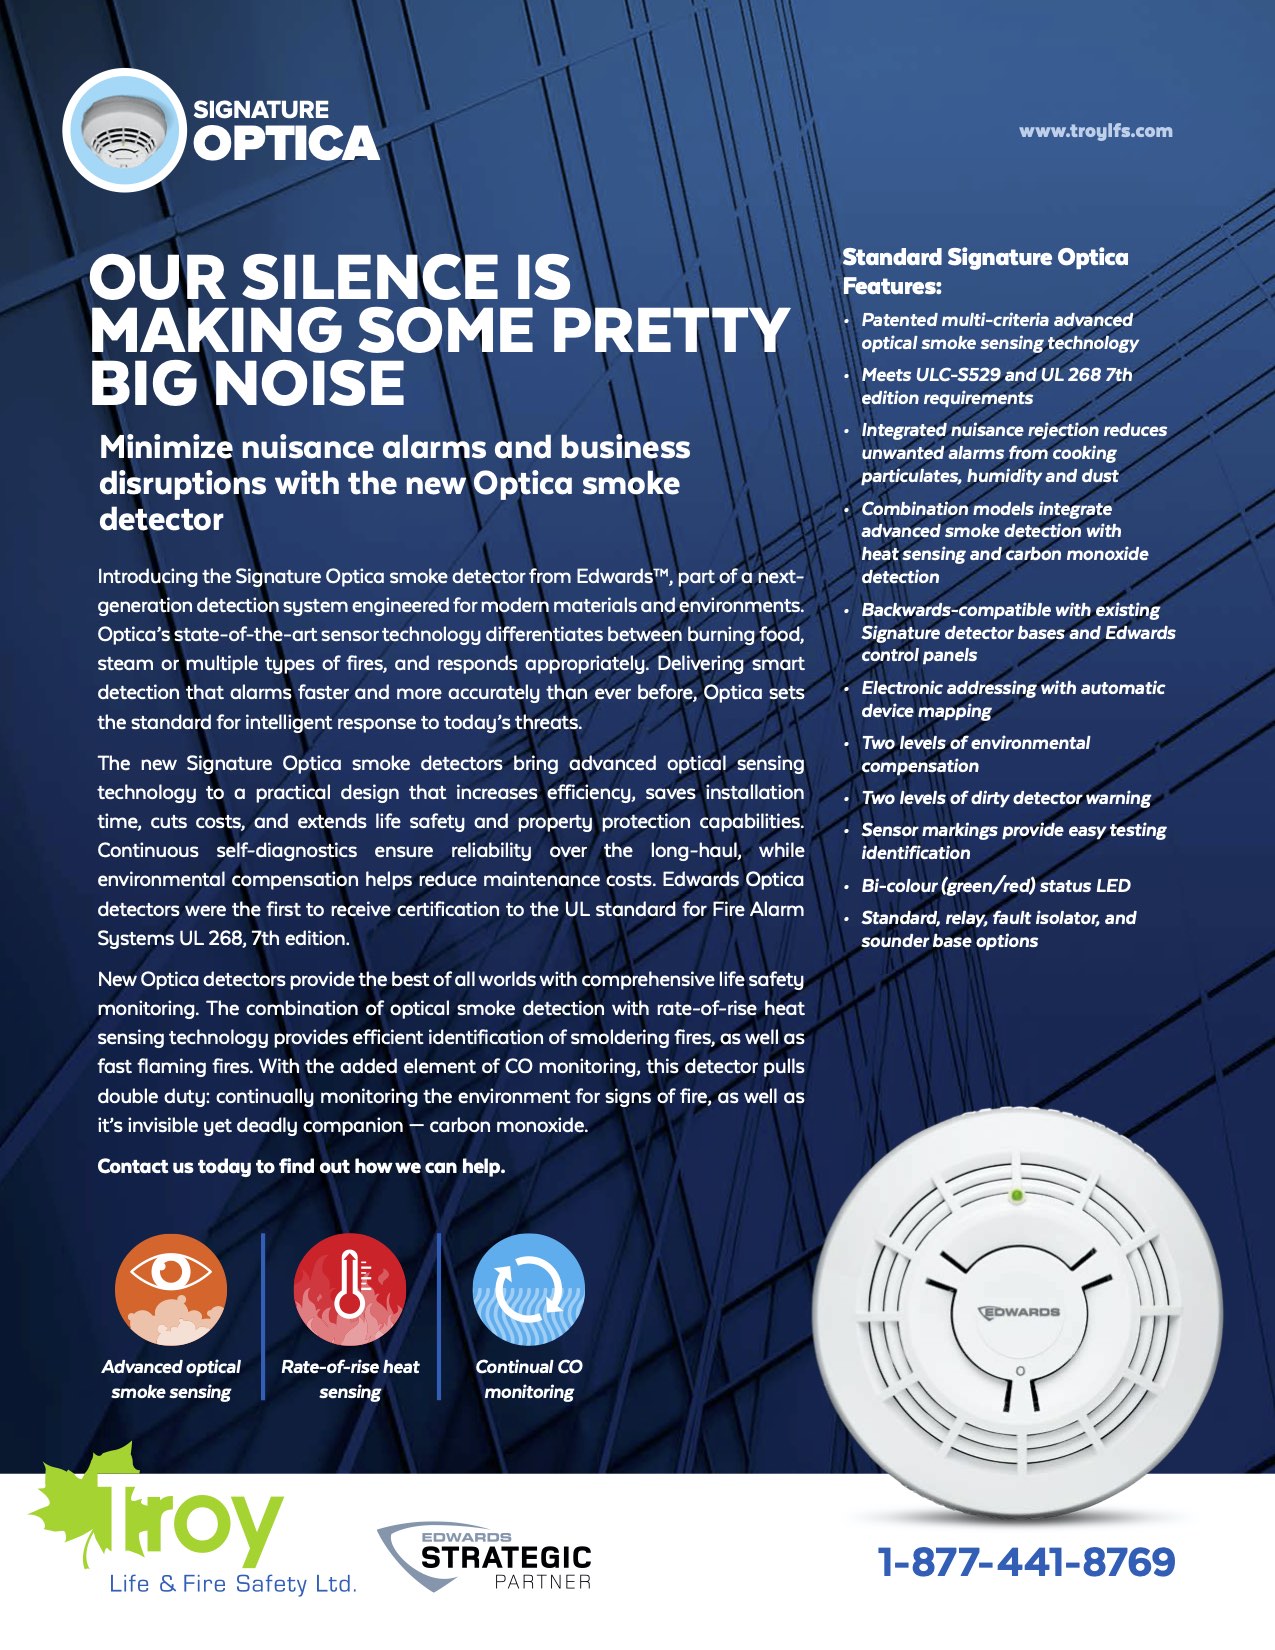 Signature Optica - Our Silence is Making Some Pretty Big Noise Flyer